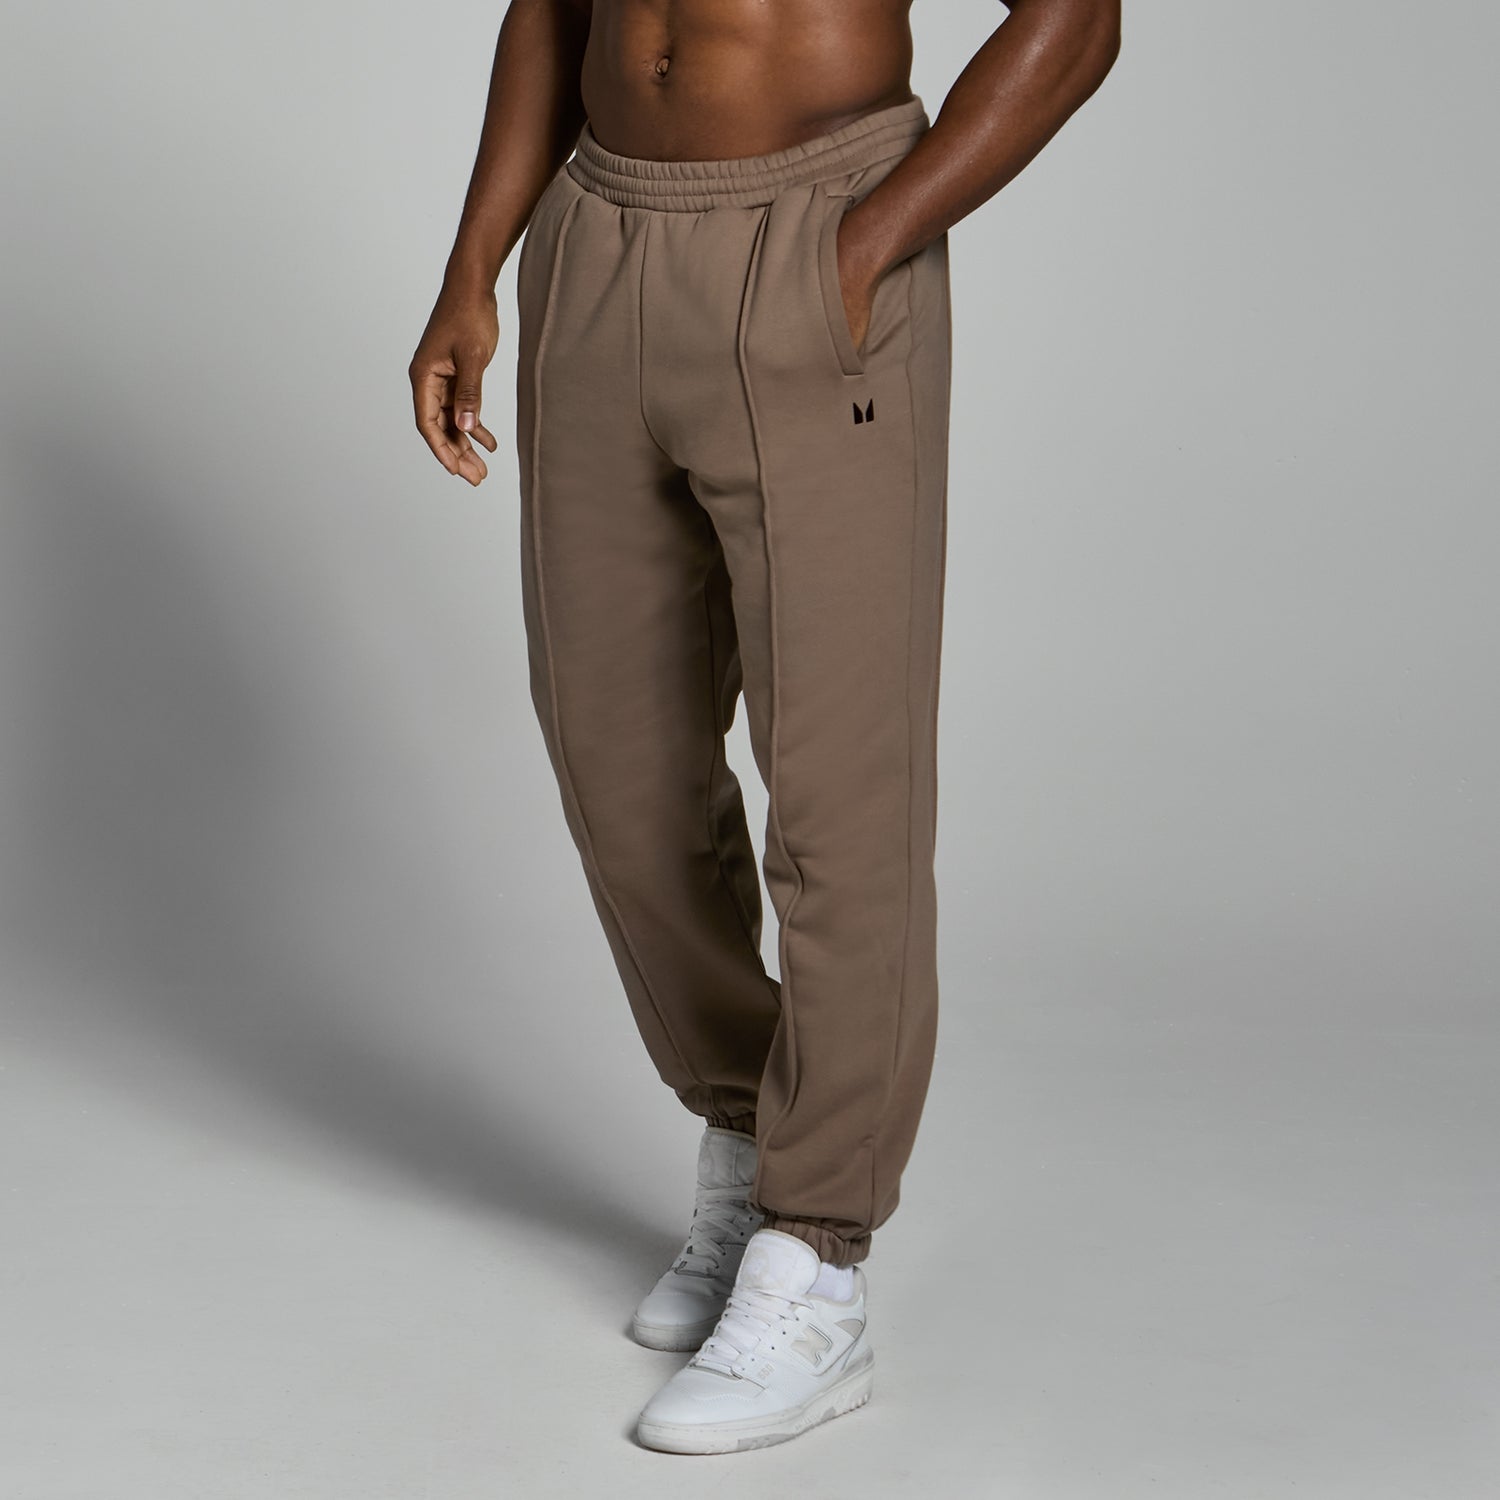 MP Lifestyle Heavyweight Oversized Joggers til mænd – Soft Brown - XS